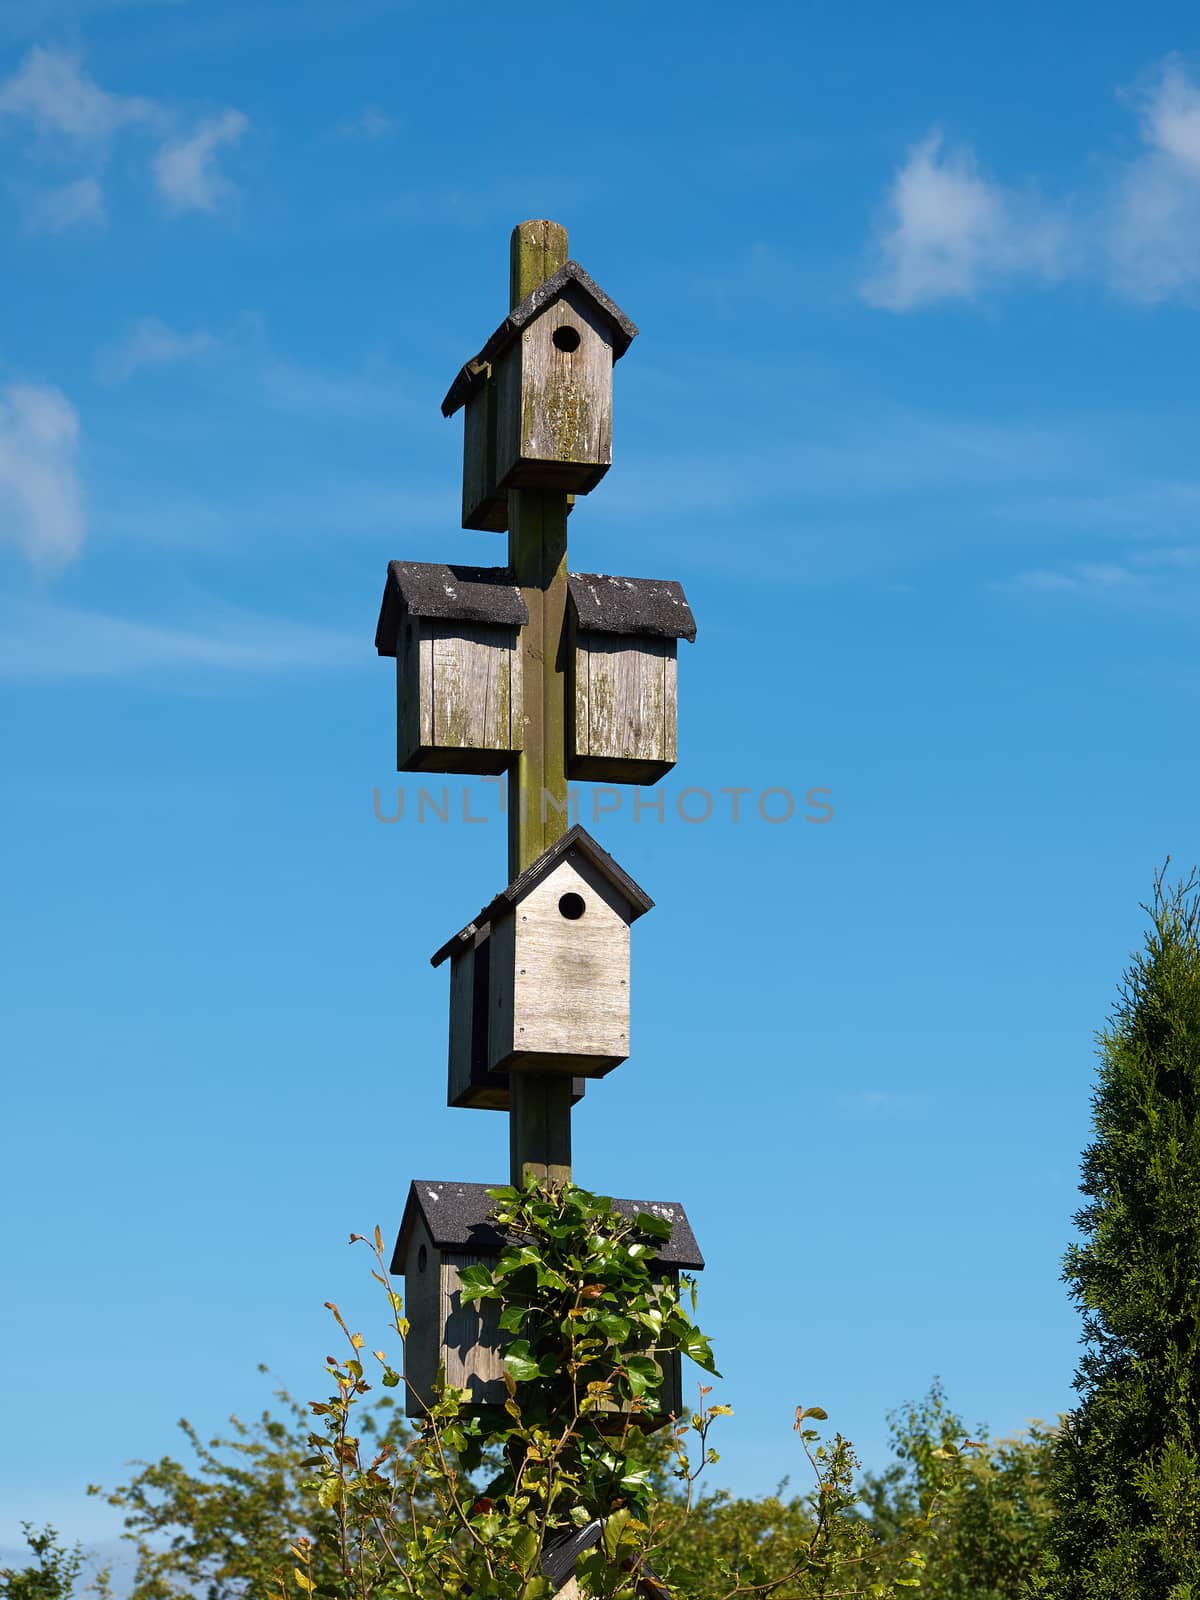 Wooden bird house by Ronyzmbow